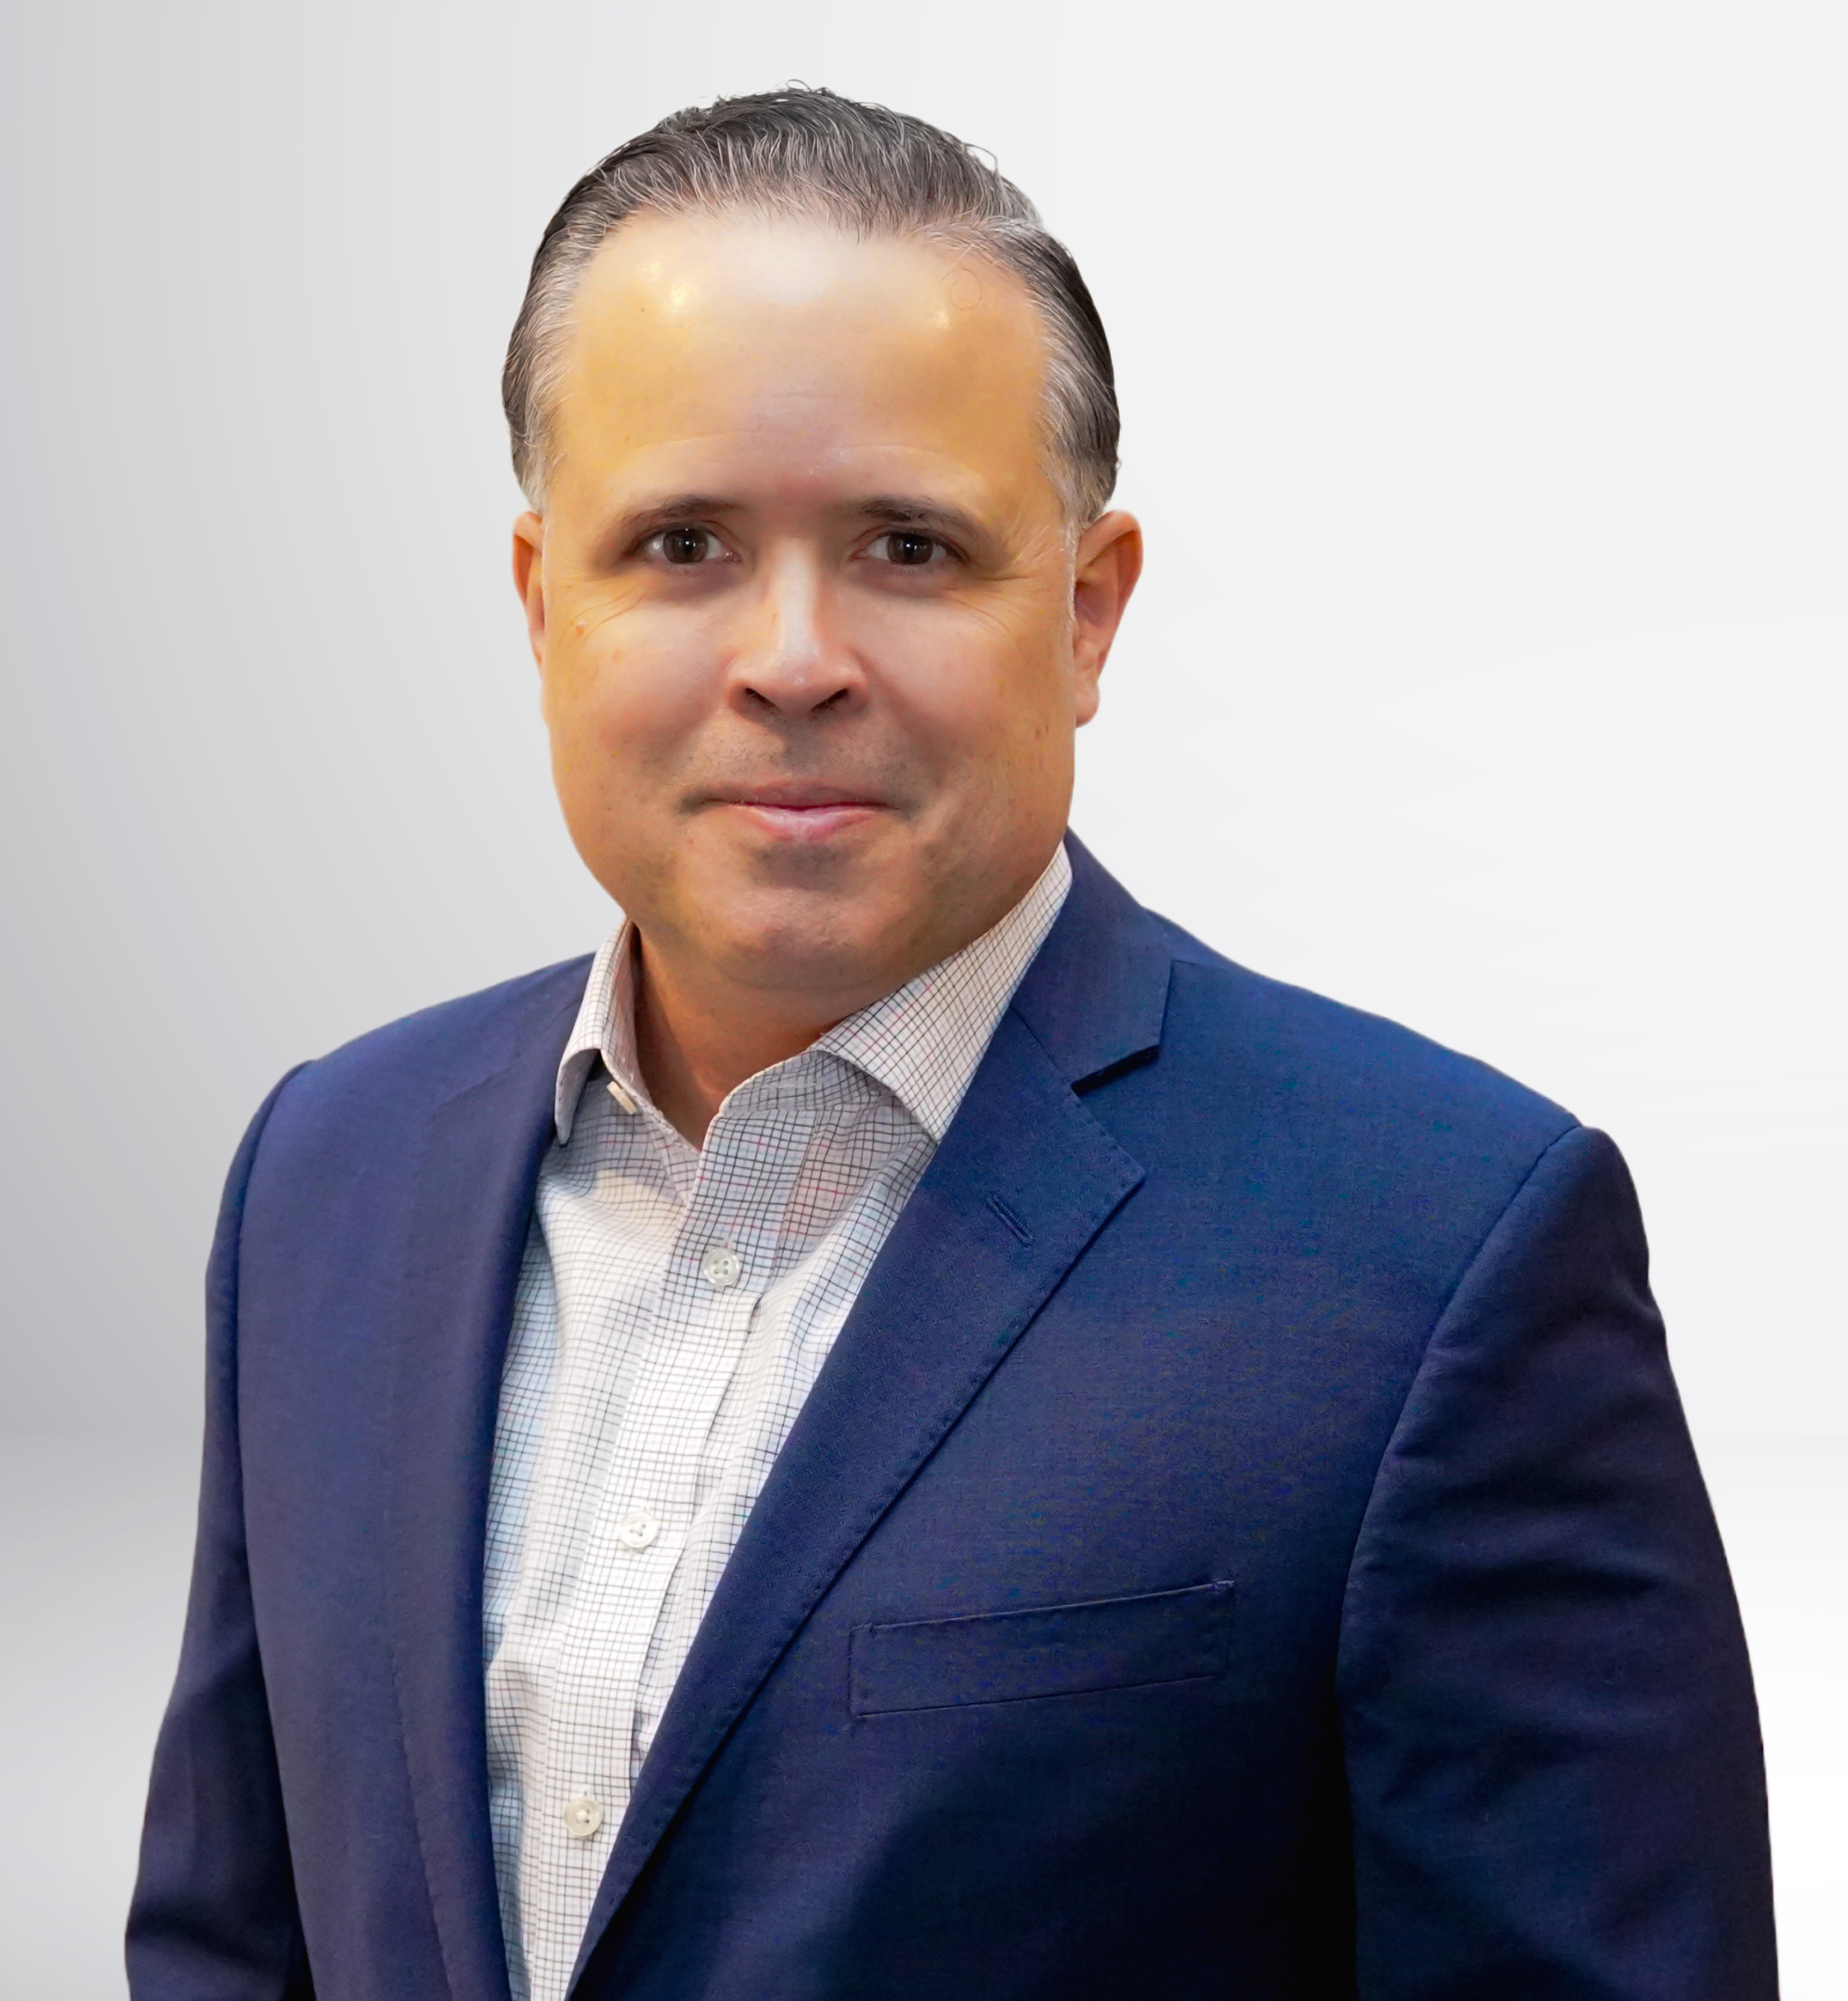 Inspired Solutions Welcomes Rick Pina as COO and CRO, Expanding Leadership Team